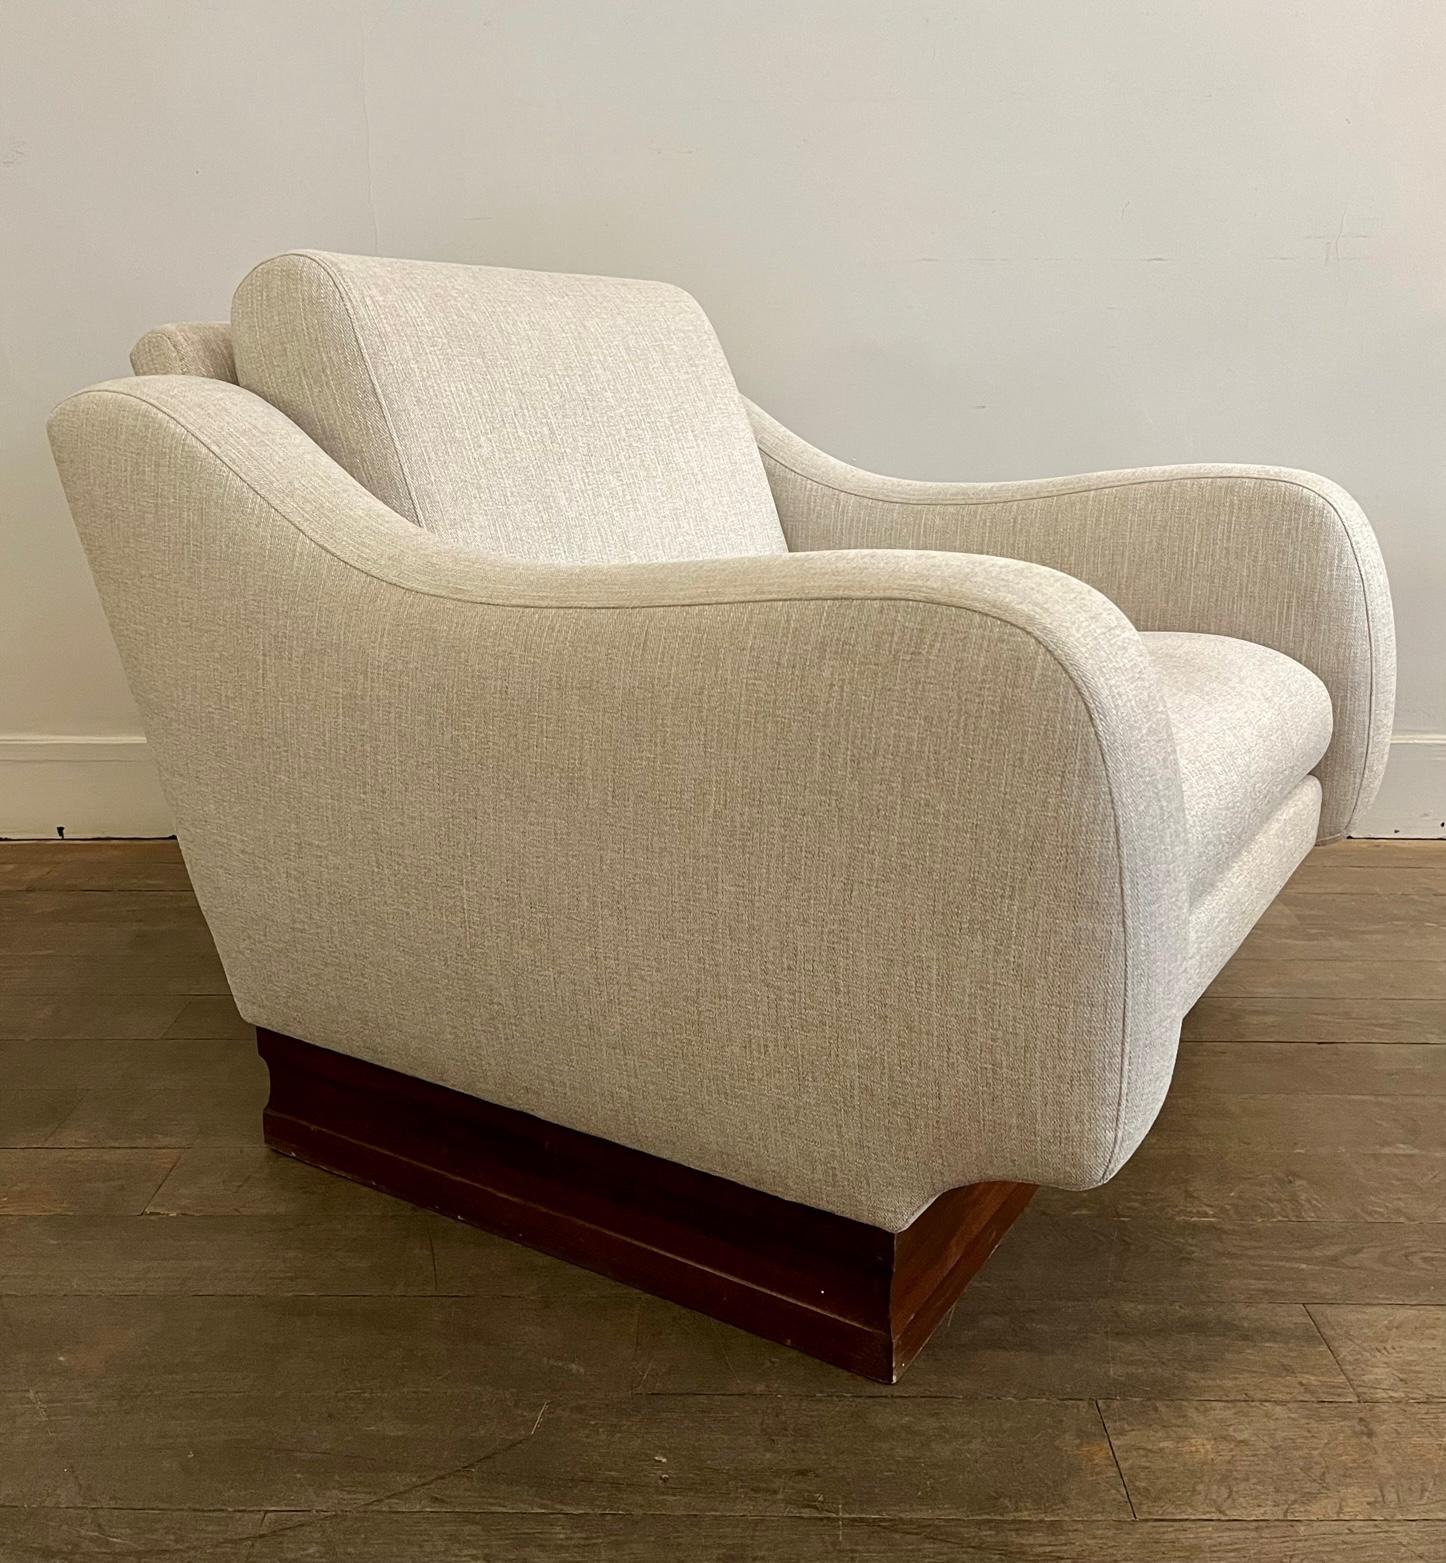 Mid-20th Century Pair of Lounge Chairs by Cassina, Italy, 1960